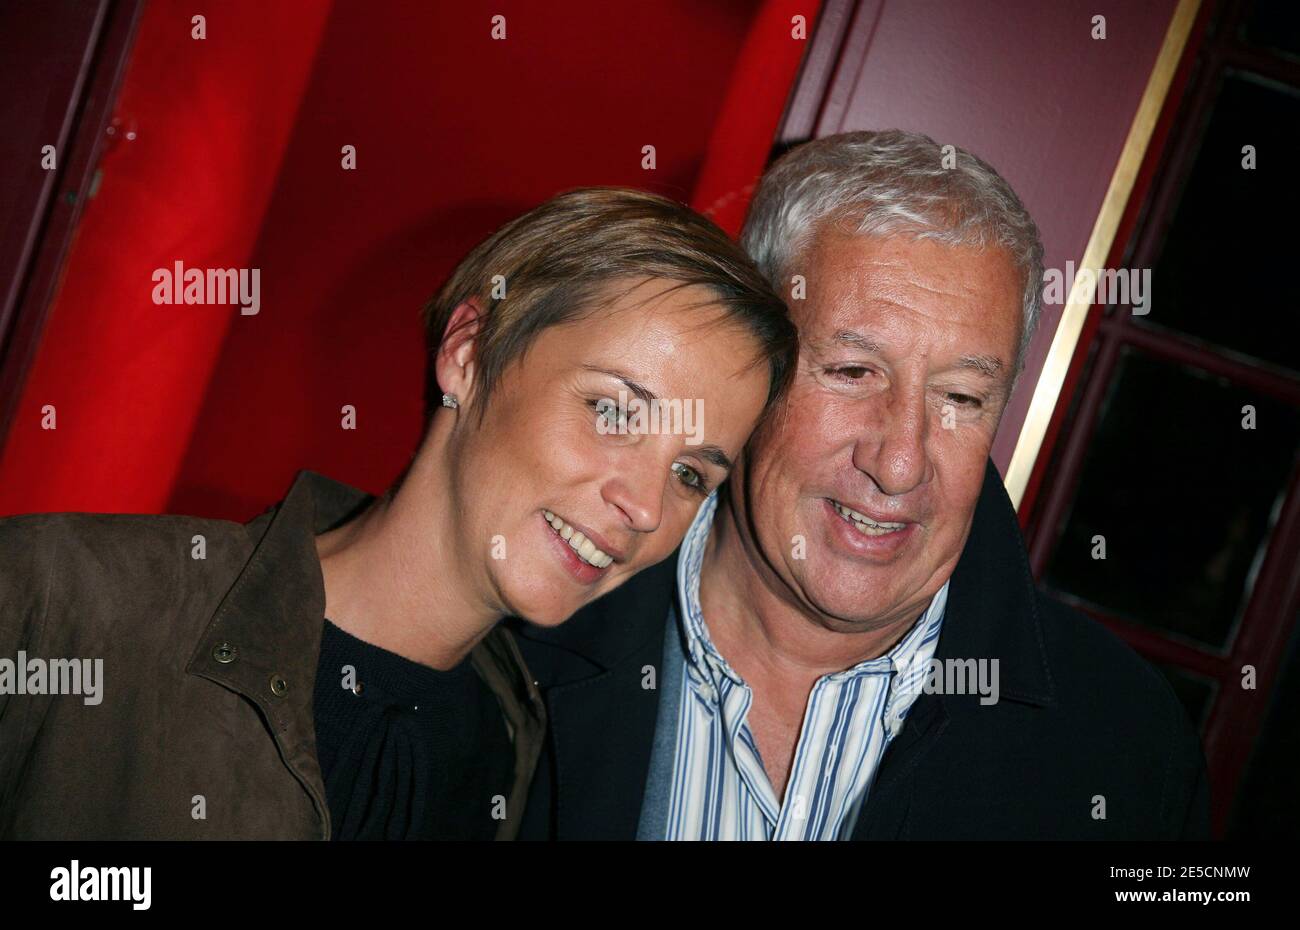 Stephane Collaro and his girlfriend attend the premiere of Jean-Marie Bigard held at Hebertot Theater in Paris, France on October 20, 2008. Photo by Denis Guignebourg/ABACAPRESS.COM Stock Photo